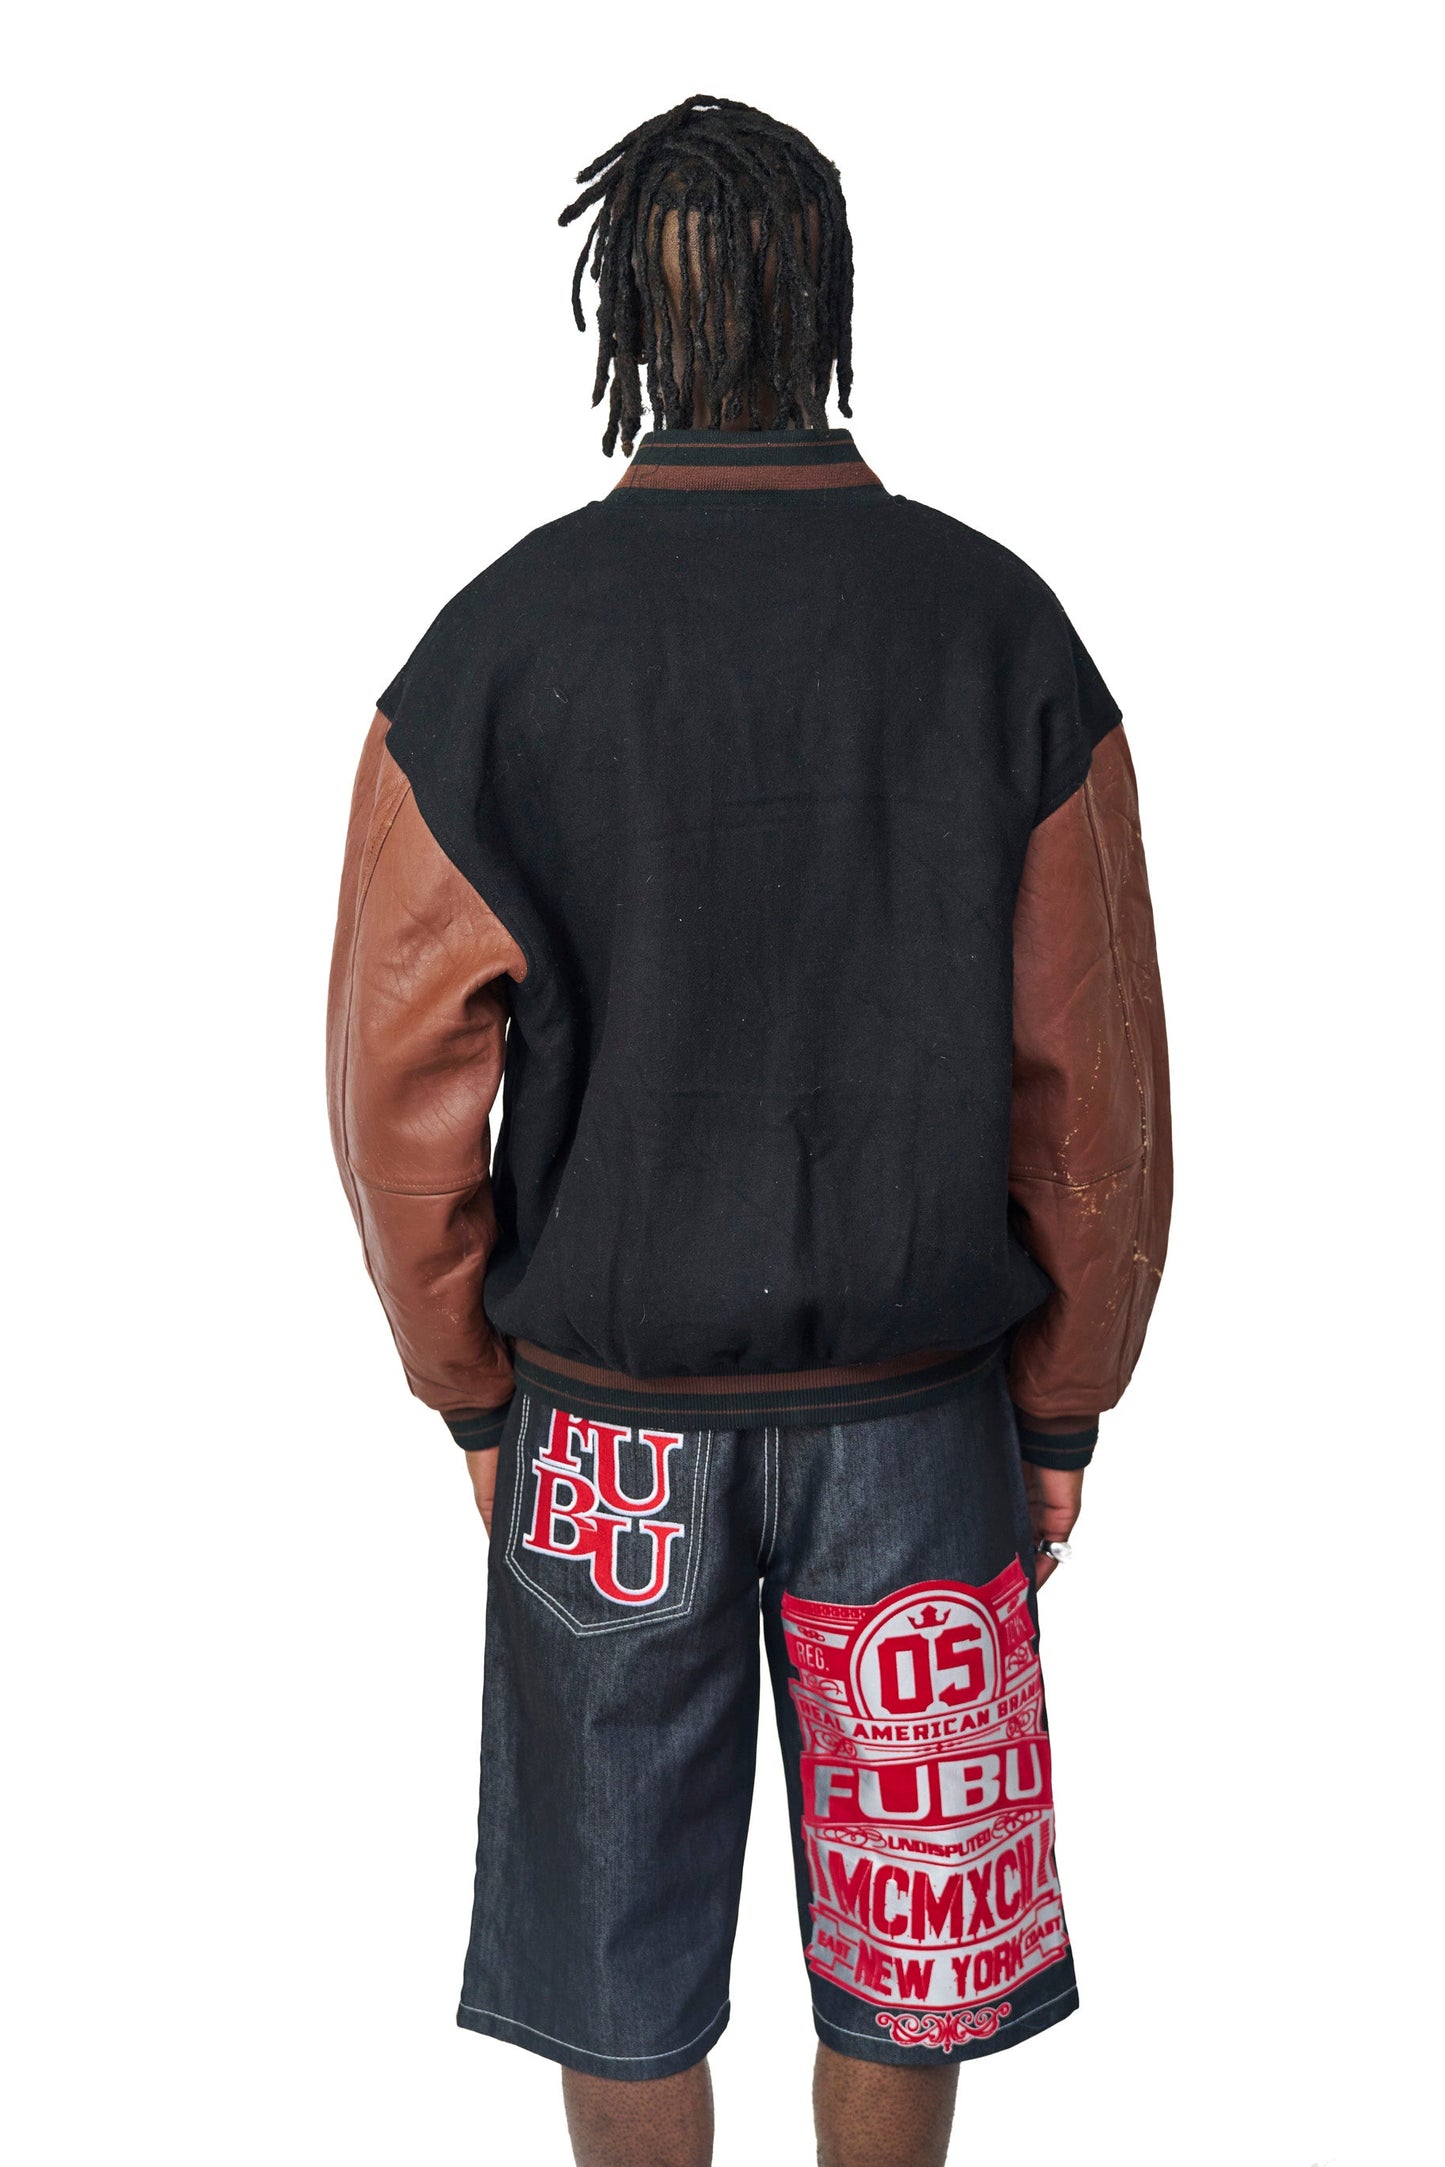 Fubu The Collection 'Undisputed New York' Embroidered Jorts